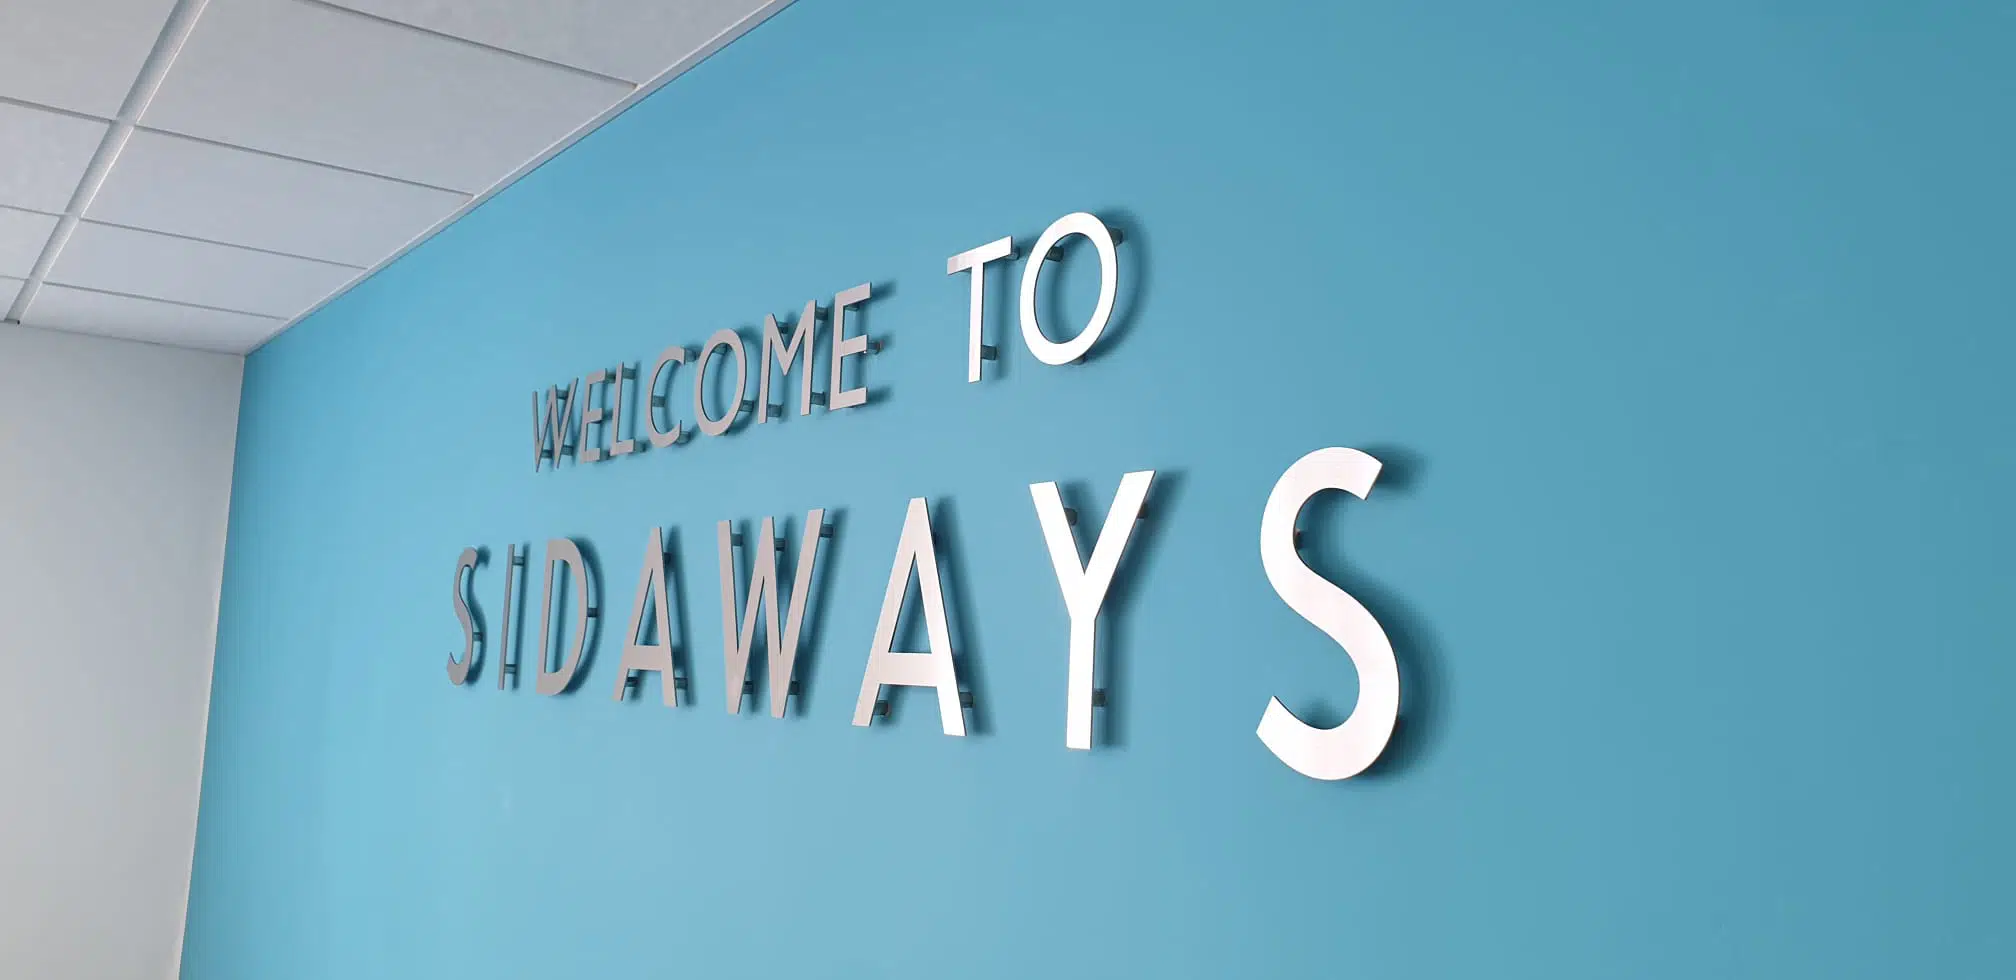 3D Raised Metal internal office sign for Sidaways by Nettl of Exeter